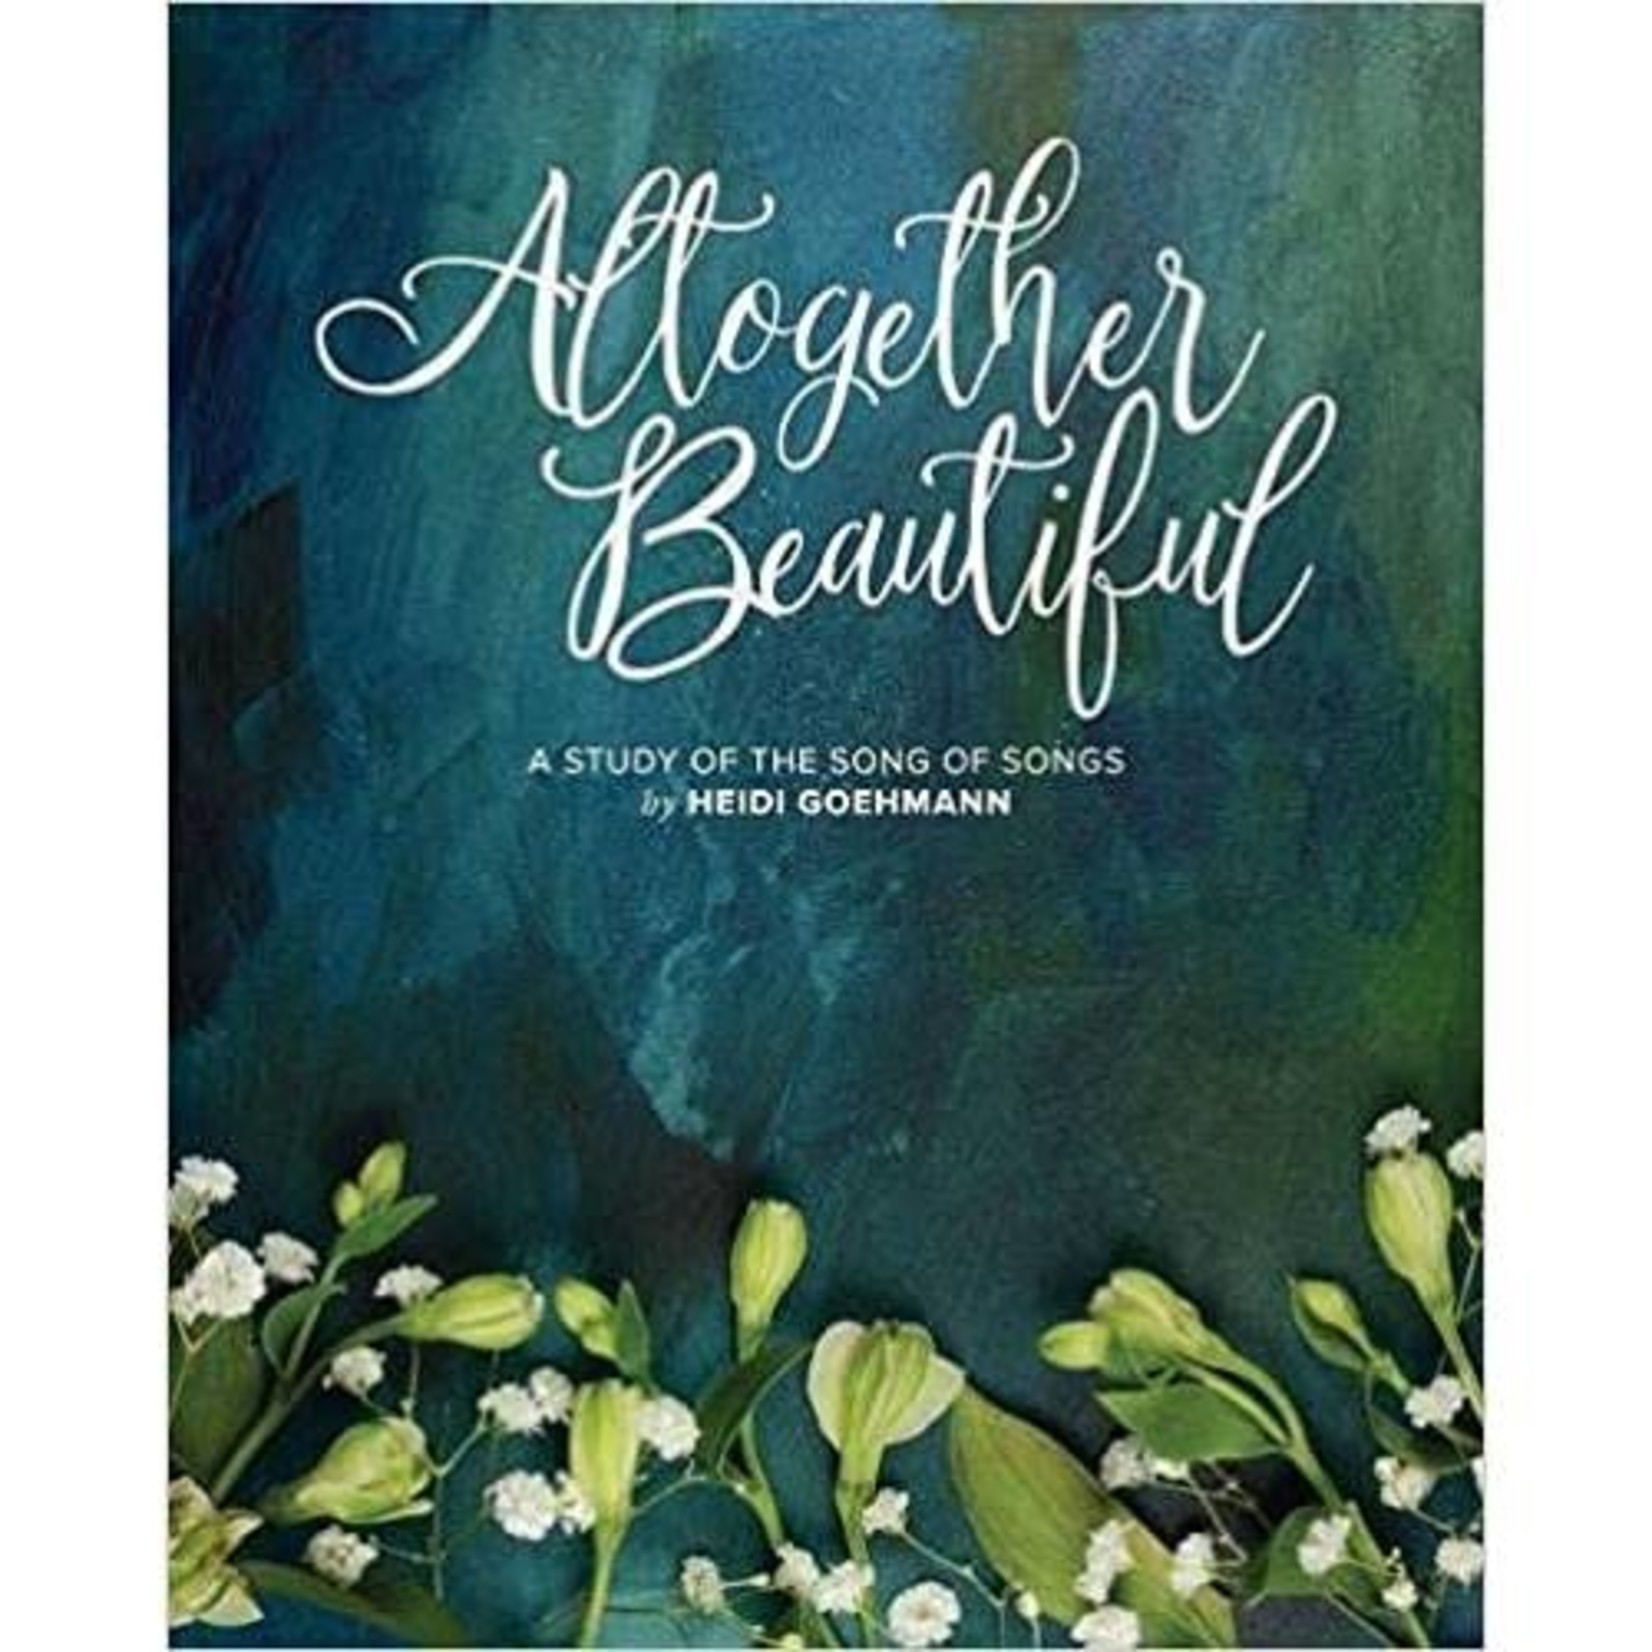 Altogether Beautiful - A Study of the Songs of Songs